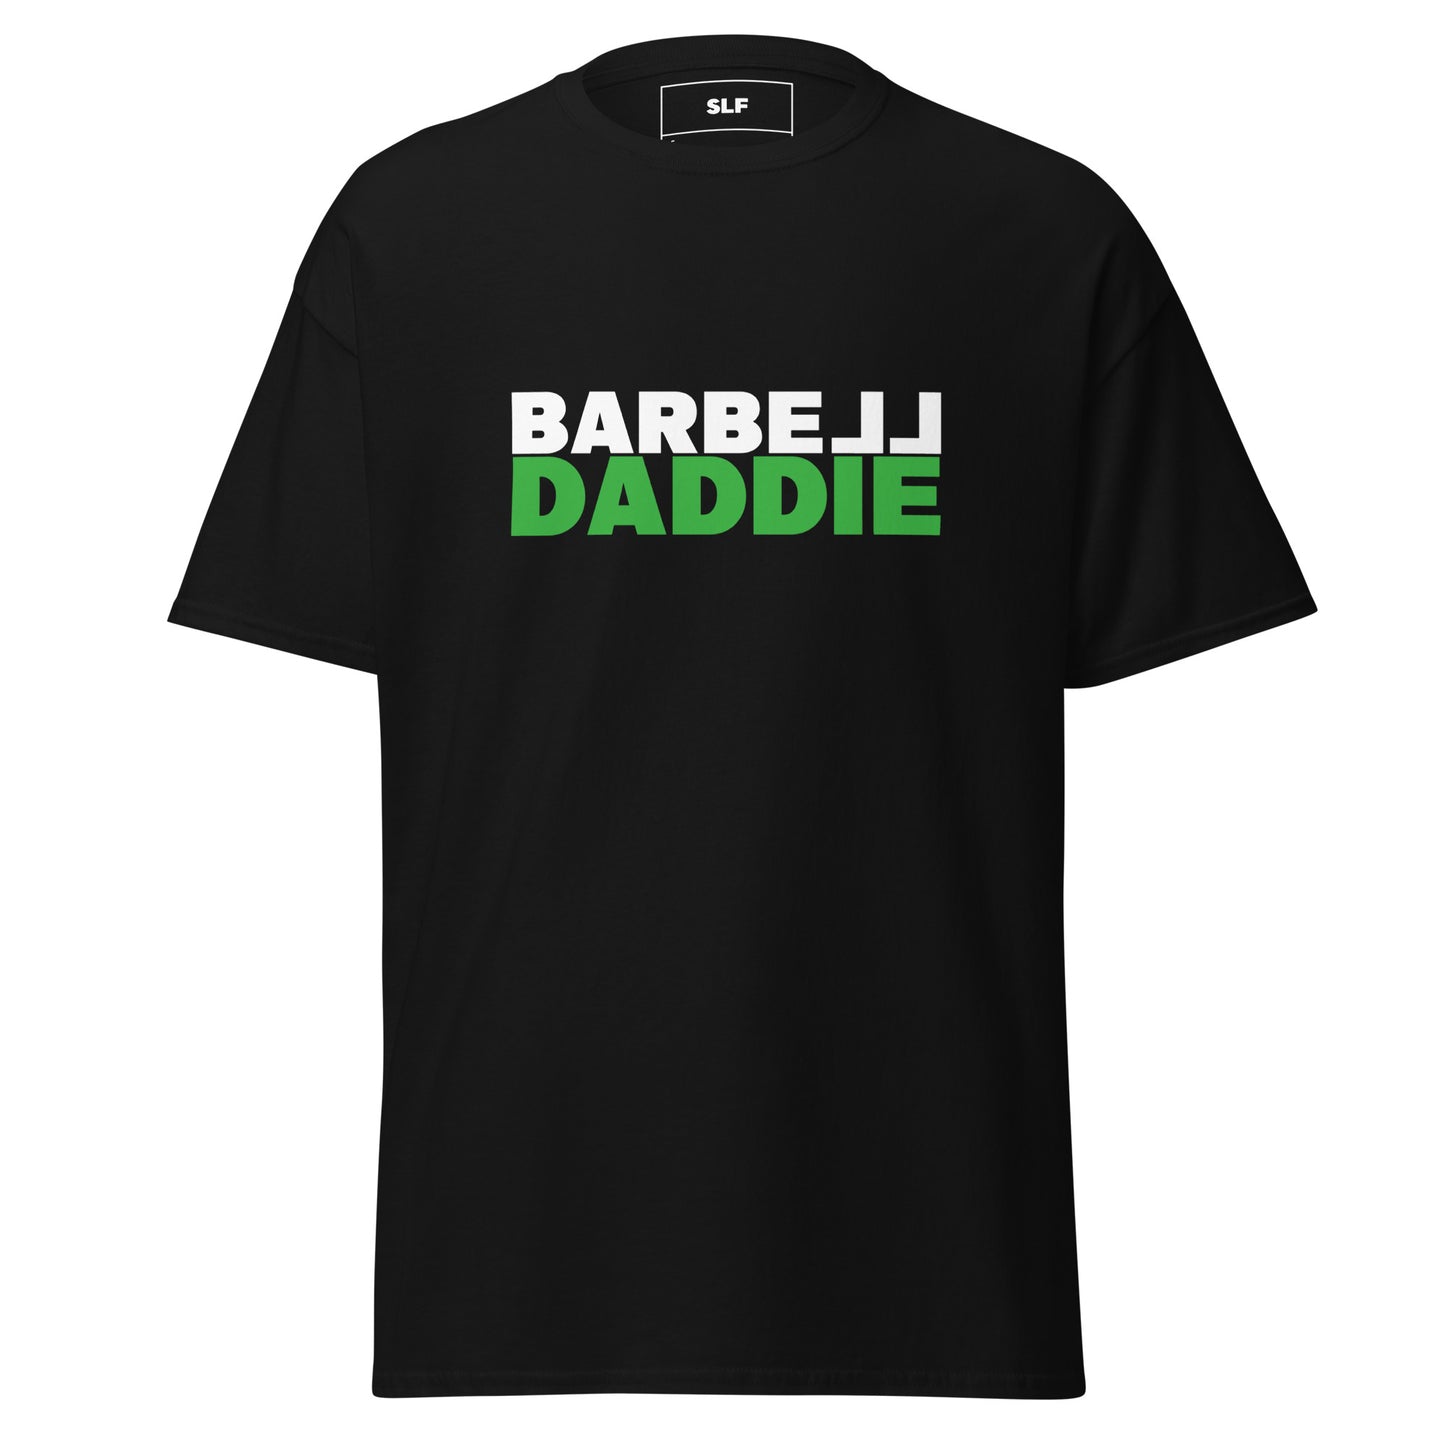 Barbell Daddie Men's classic tee